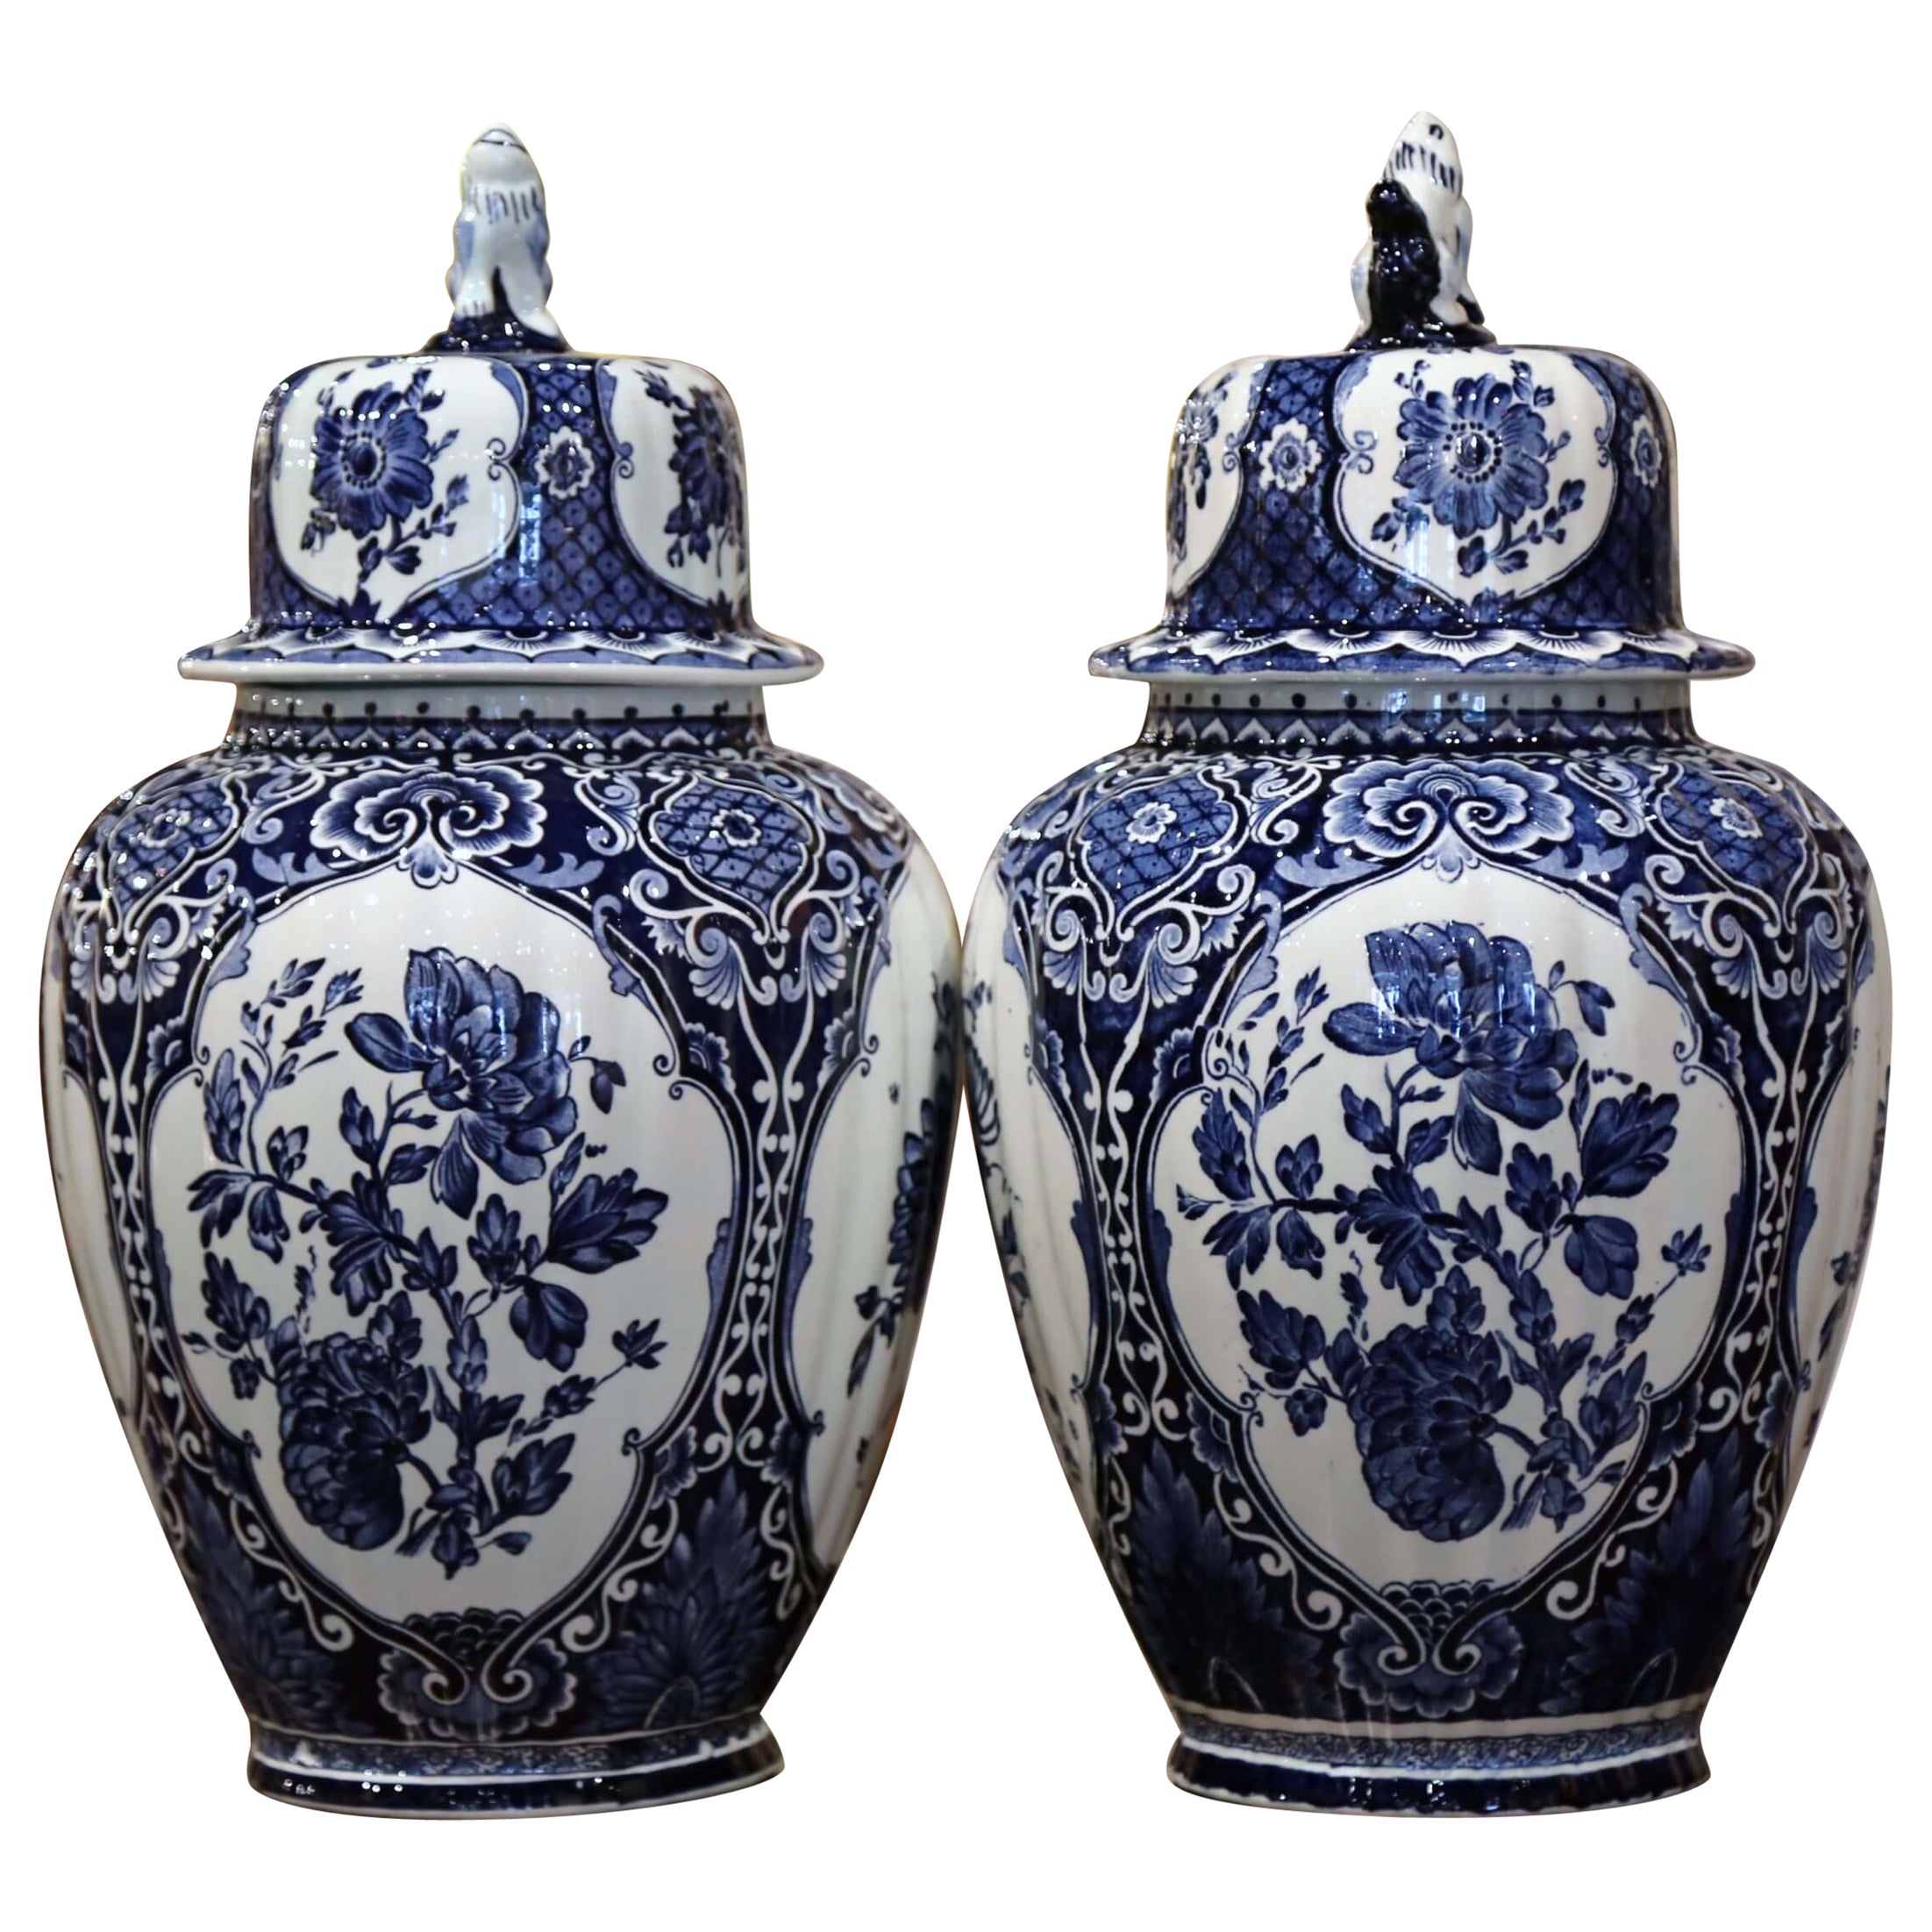 Pair of Mid-20th Century Dutch Painted Blue and White Faience Delft Ginger Jars